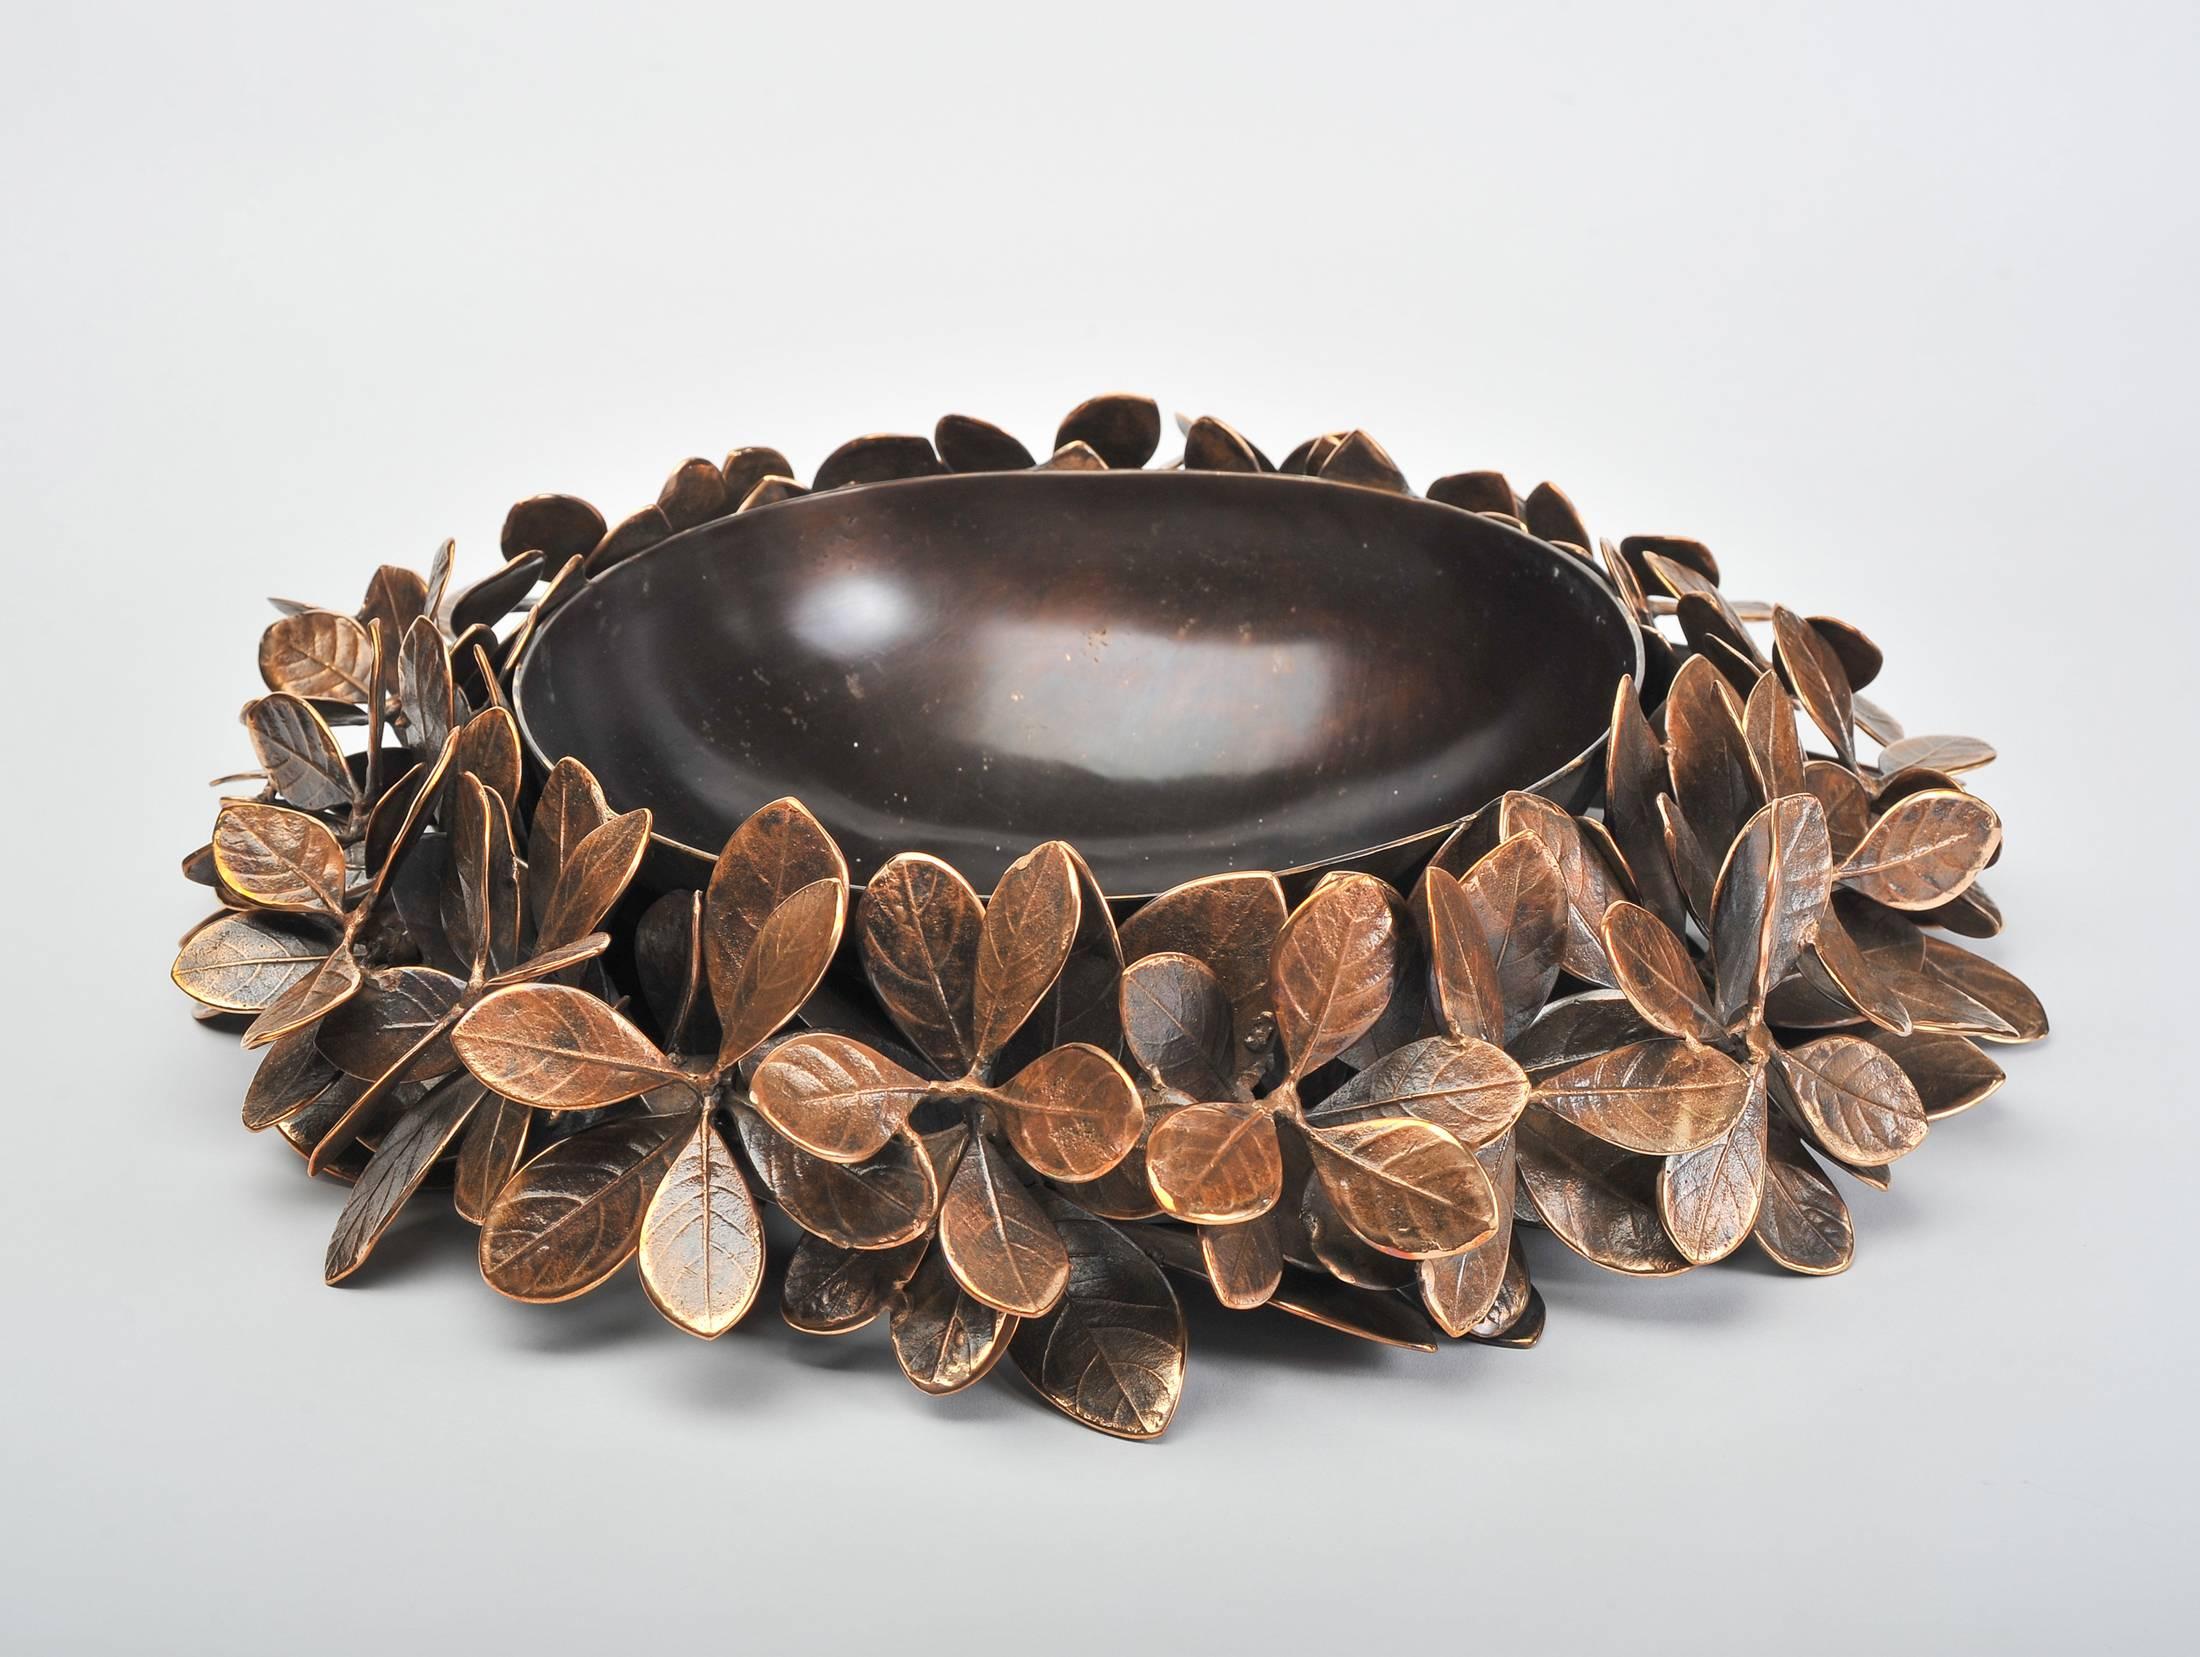 Limited edition cast bronze leaf bowl with patina finish. Each leaf is handmade and then put together, making every bowl unique.